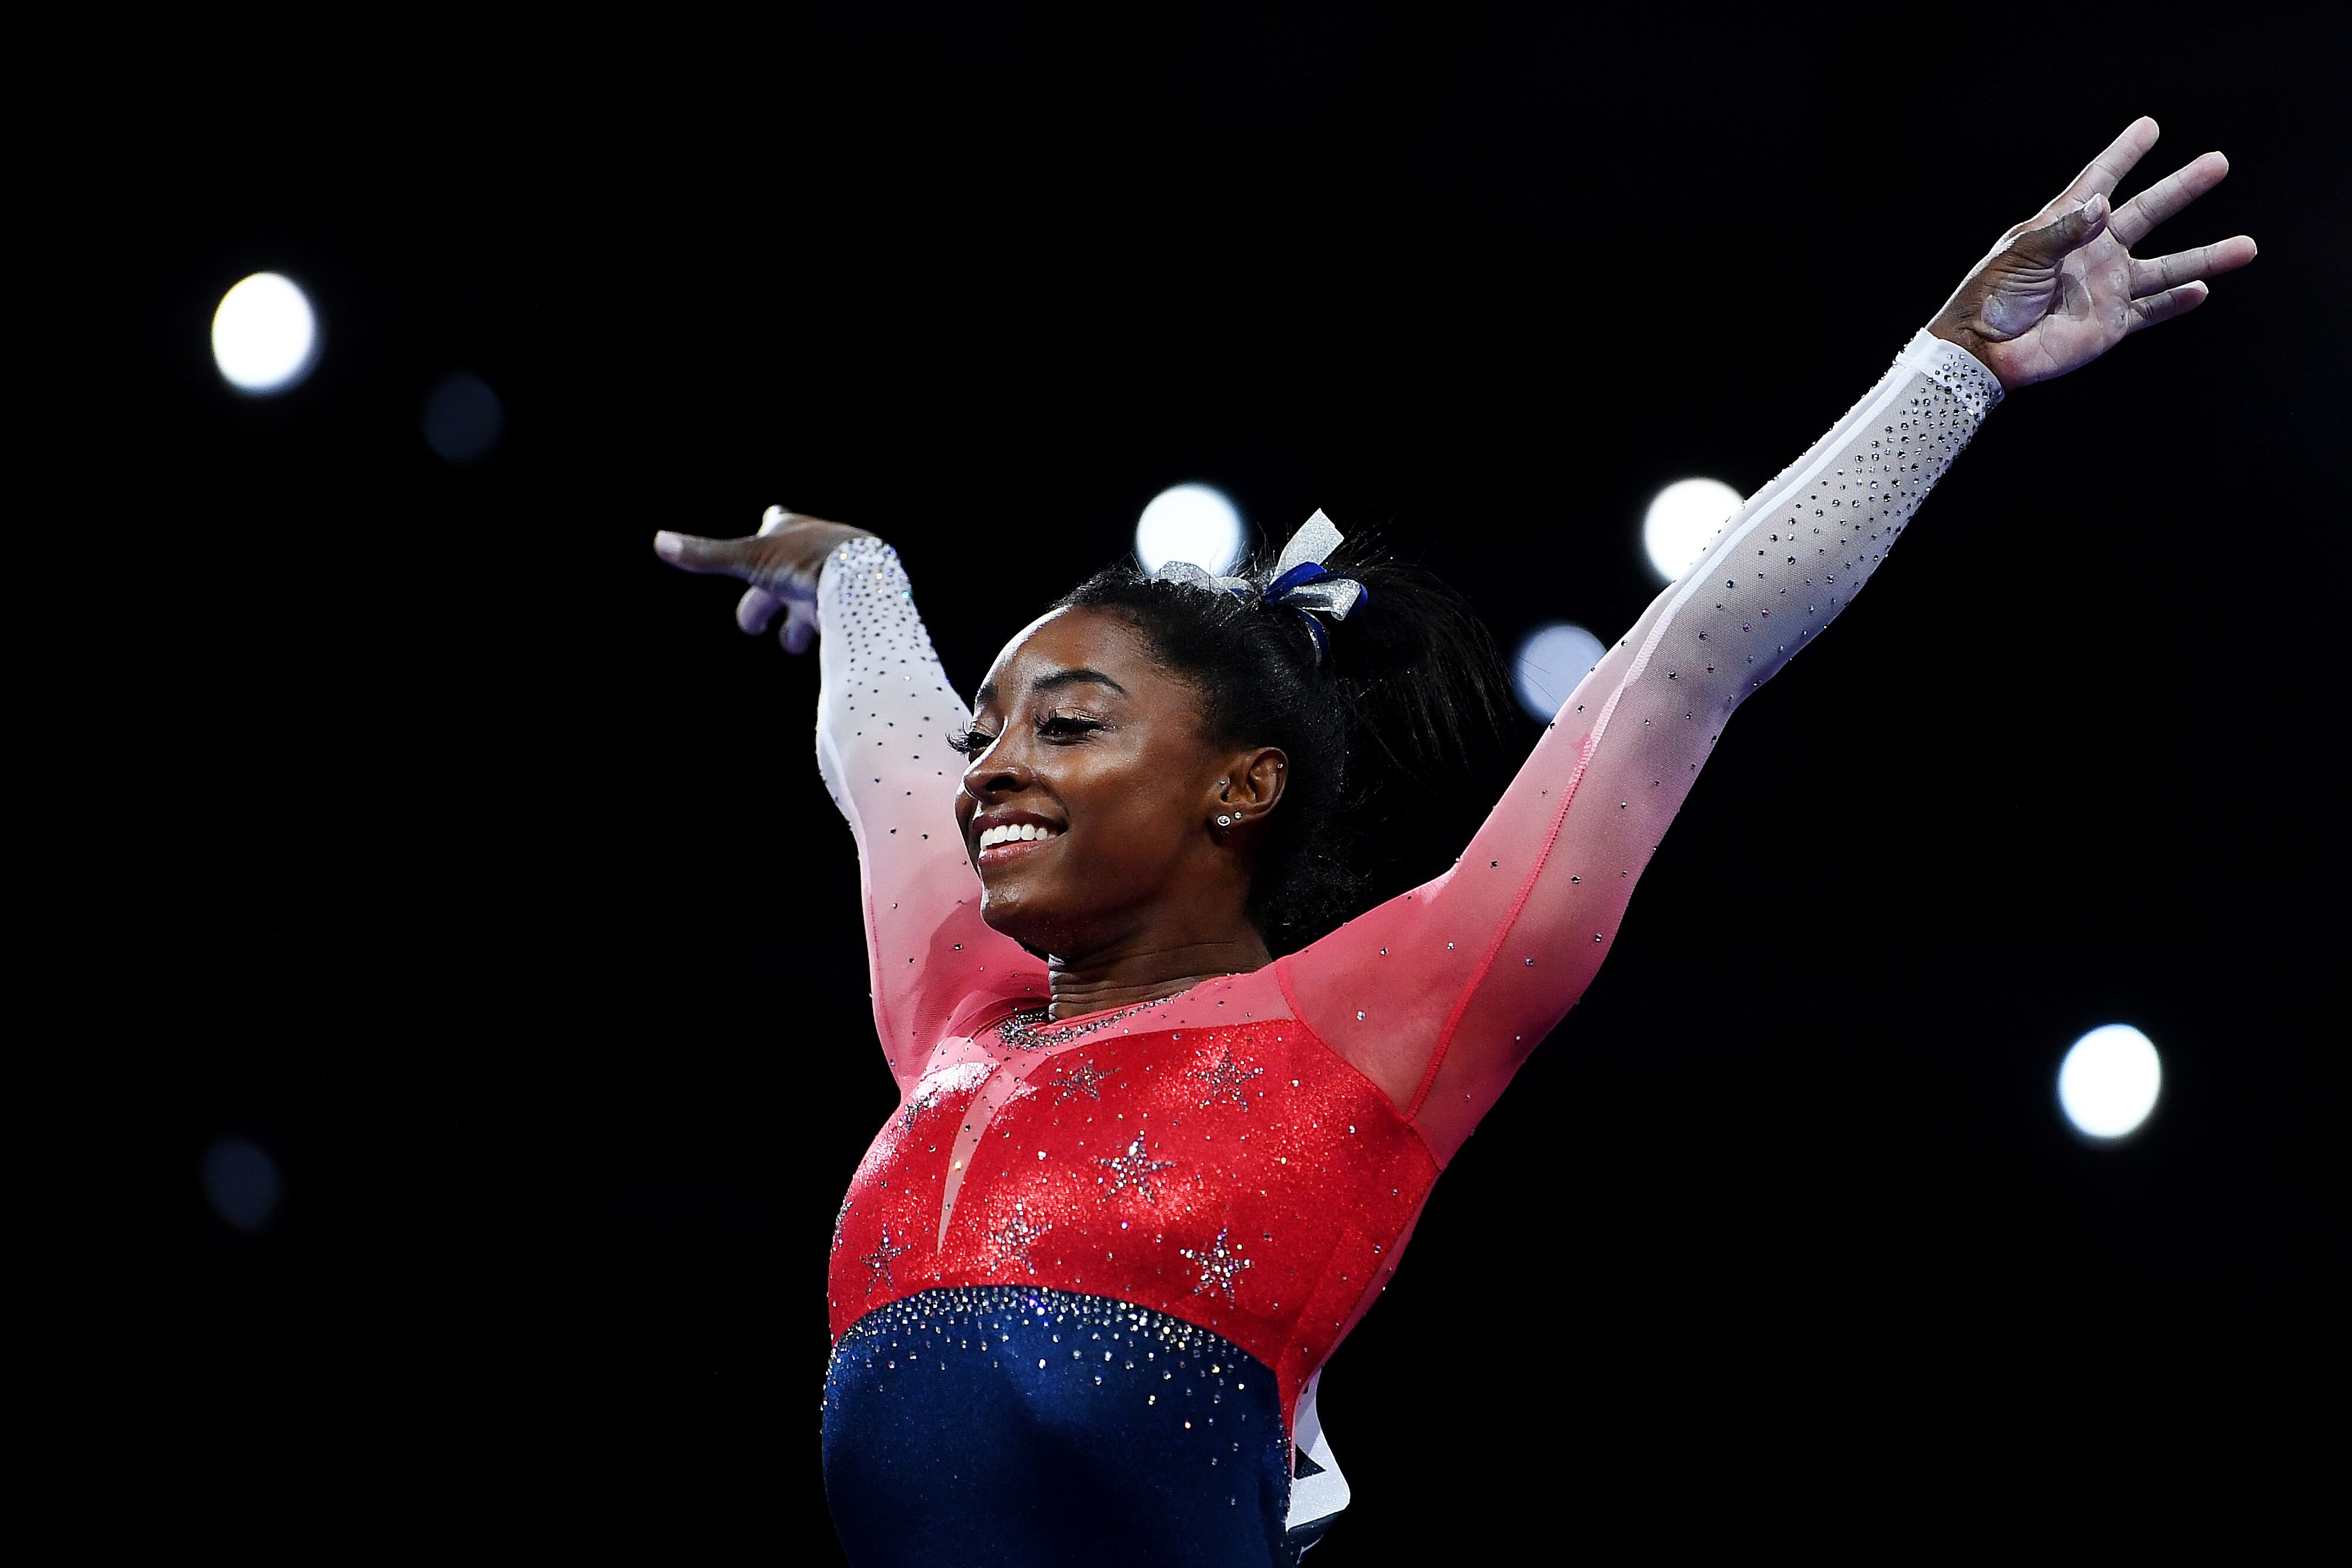 Simone Biles during the FIG Artistic Gymnastics World Championships on October 08, 2019. | Photo: Getty Images